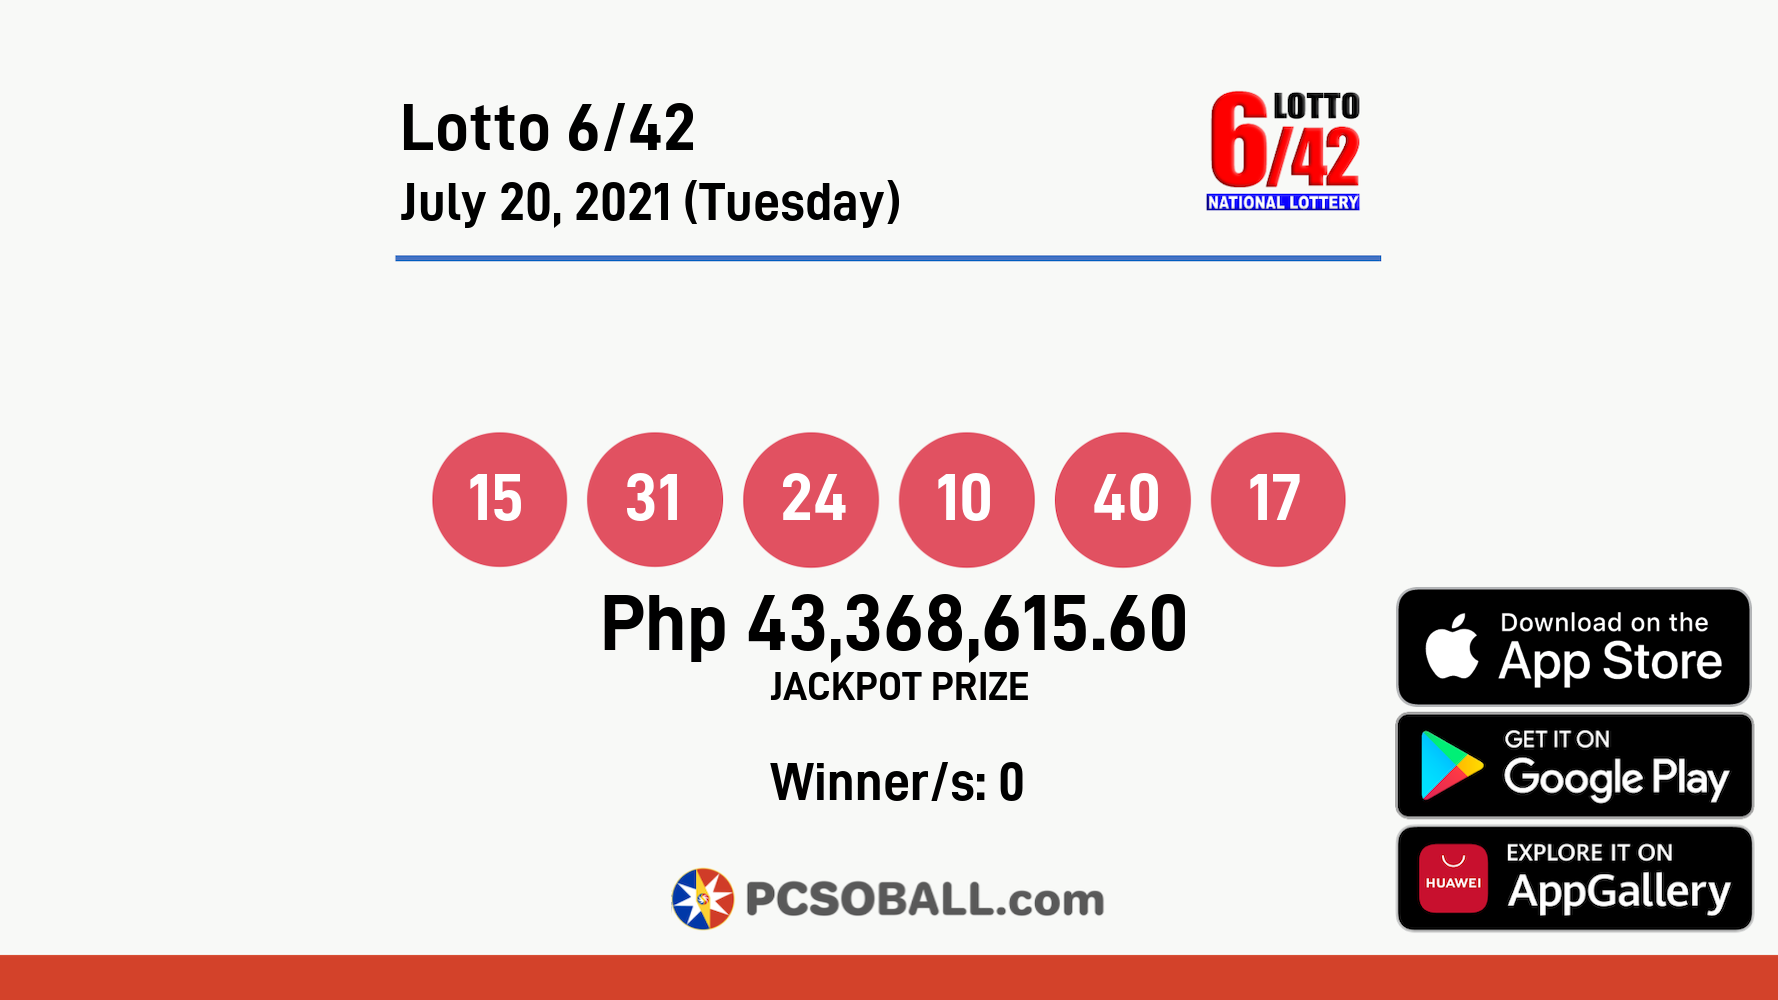 Lotto 6/42 July 20, 2021 (Tuesday) Result